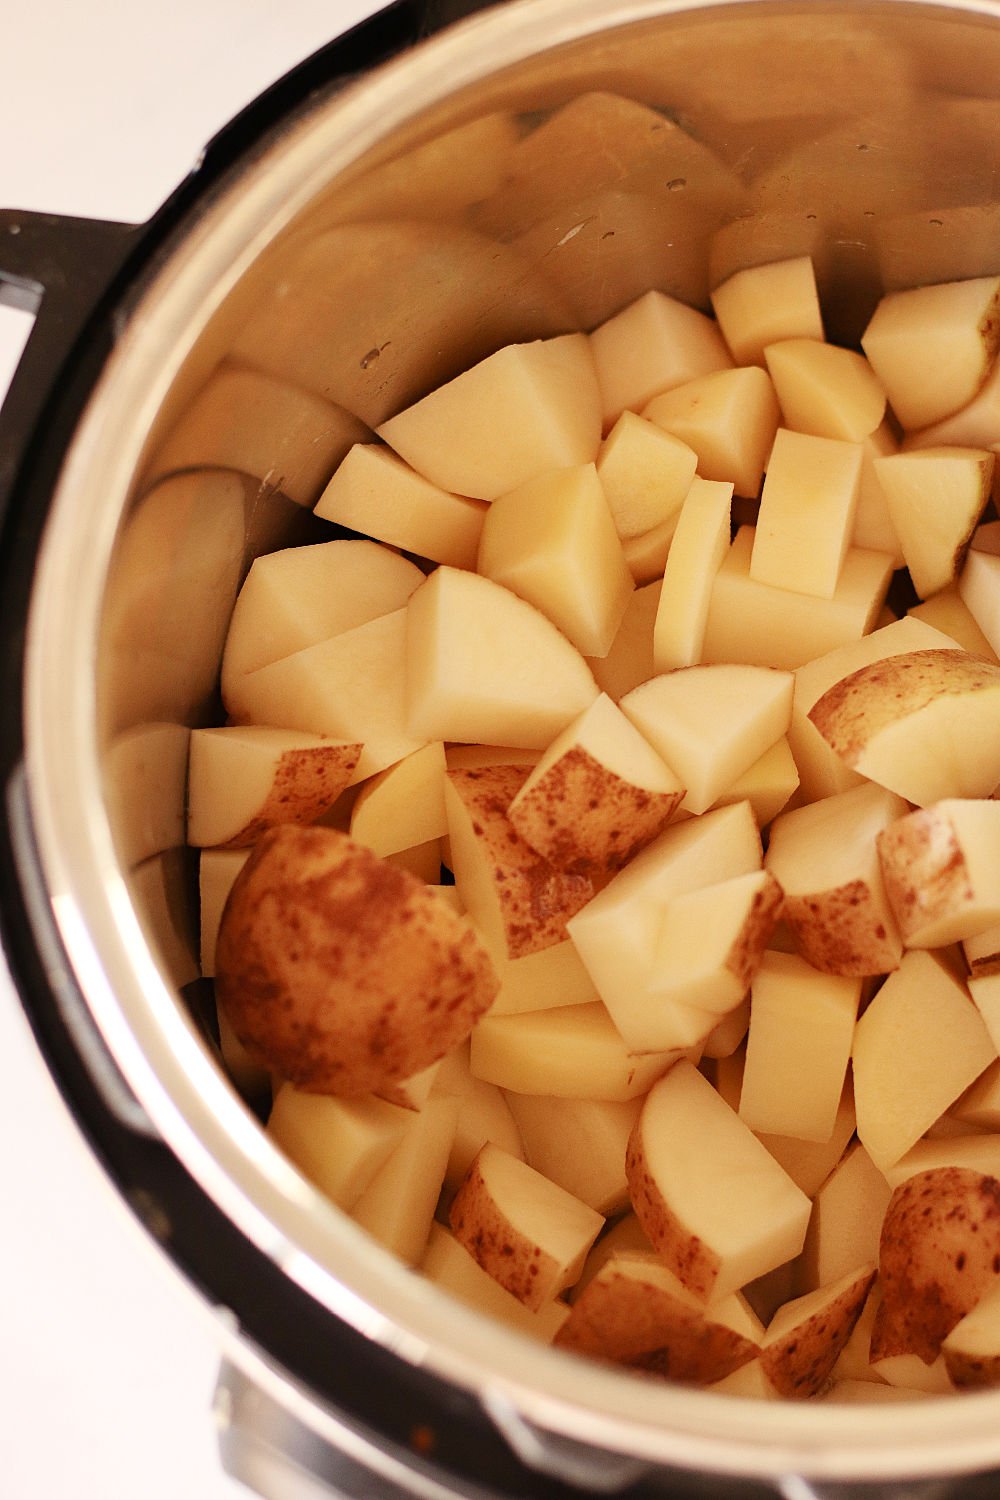 Cubed potatoes added to the instant pot